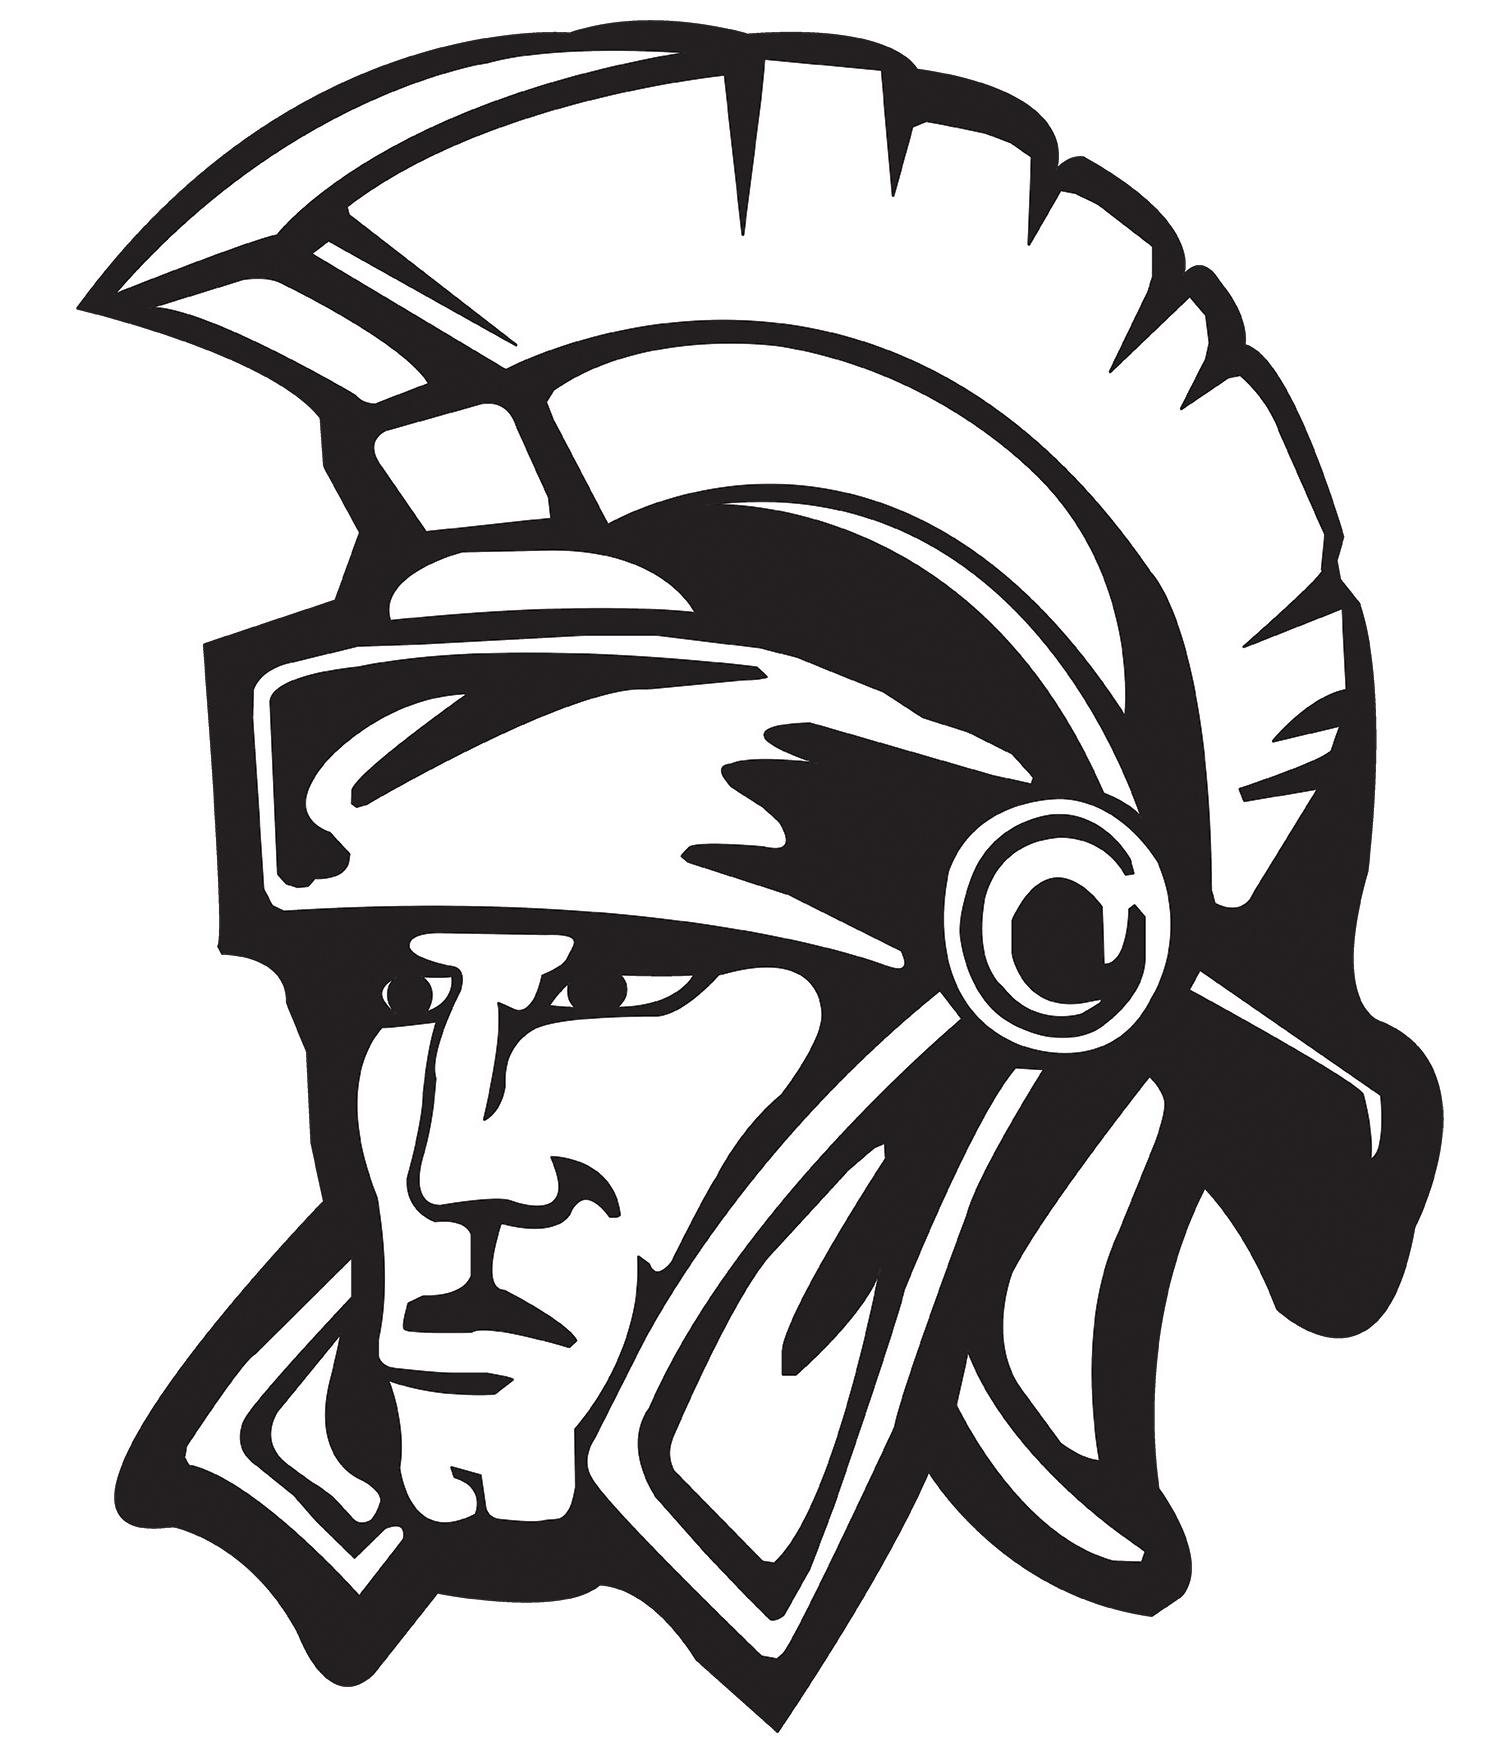 Trinidad State Trojan Athletic logo in black and white image